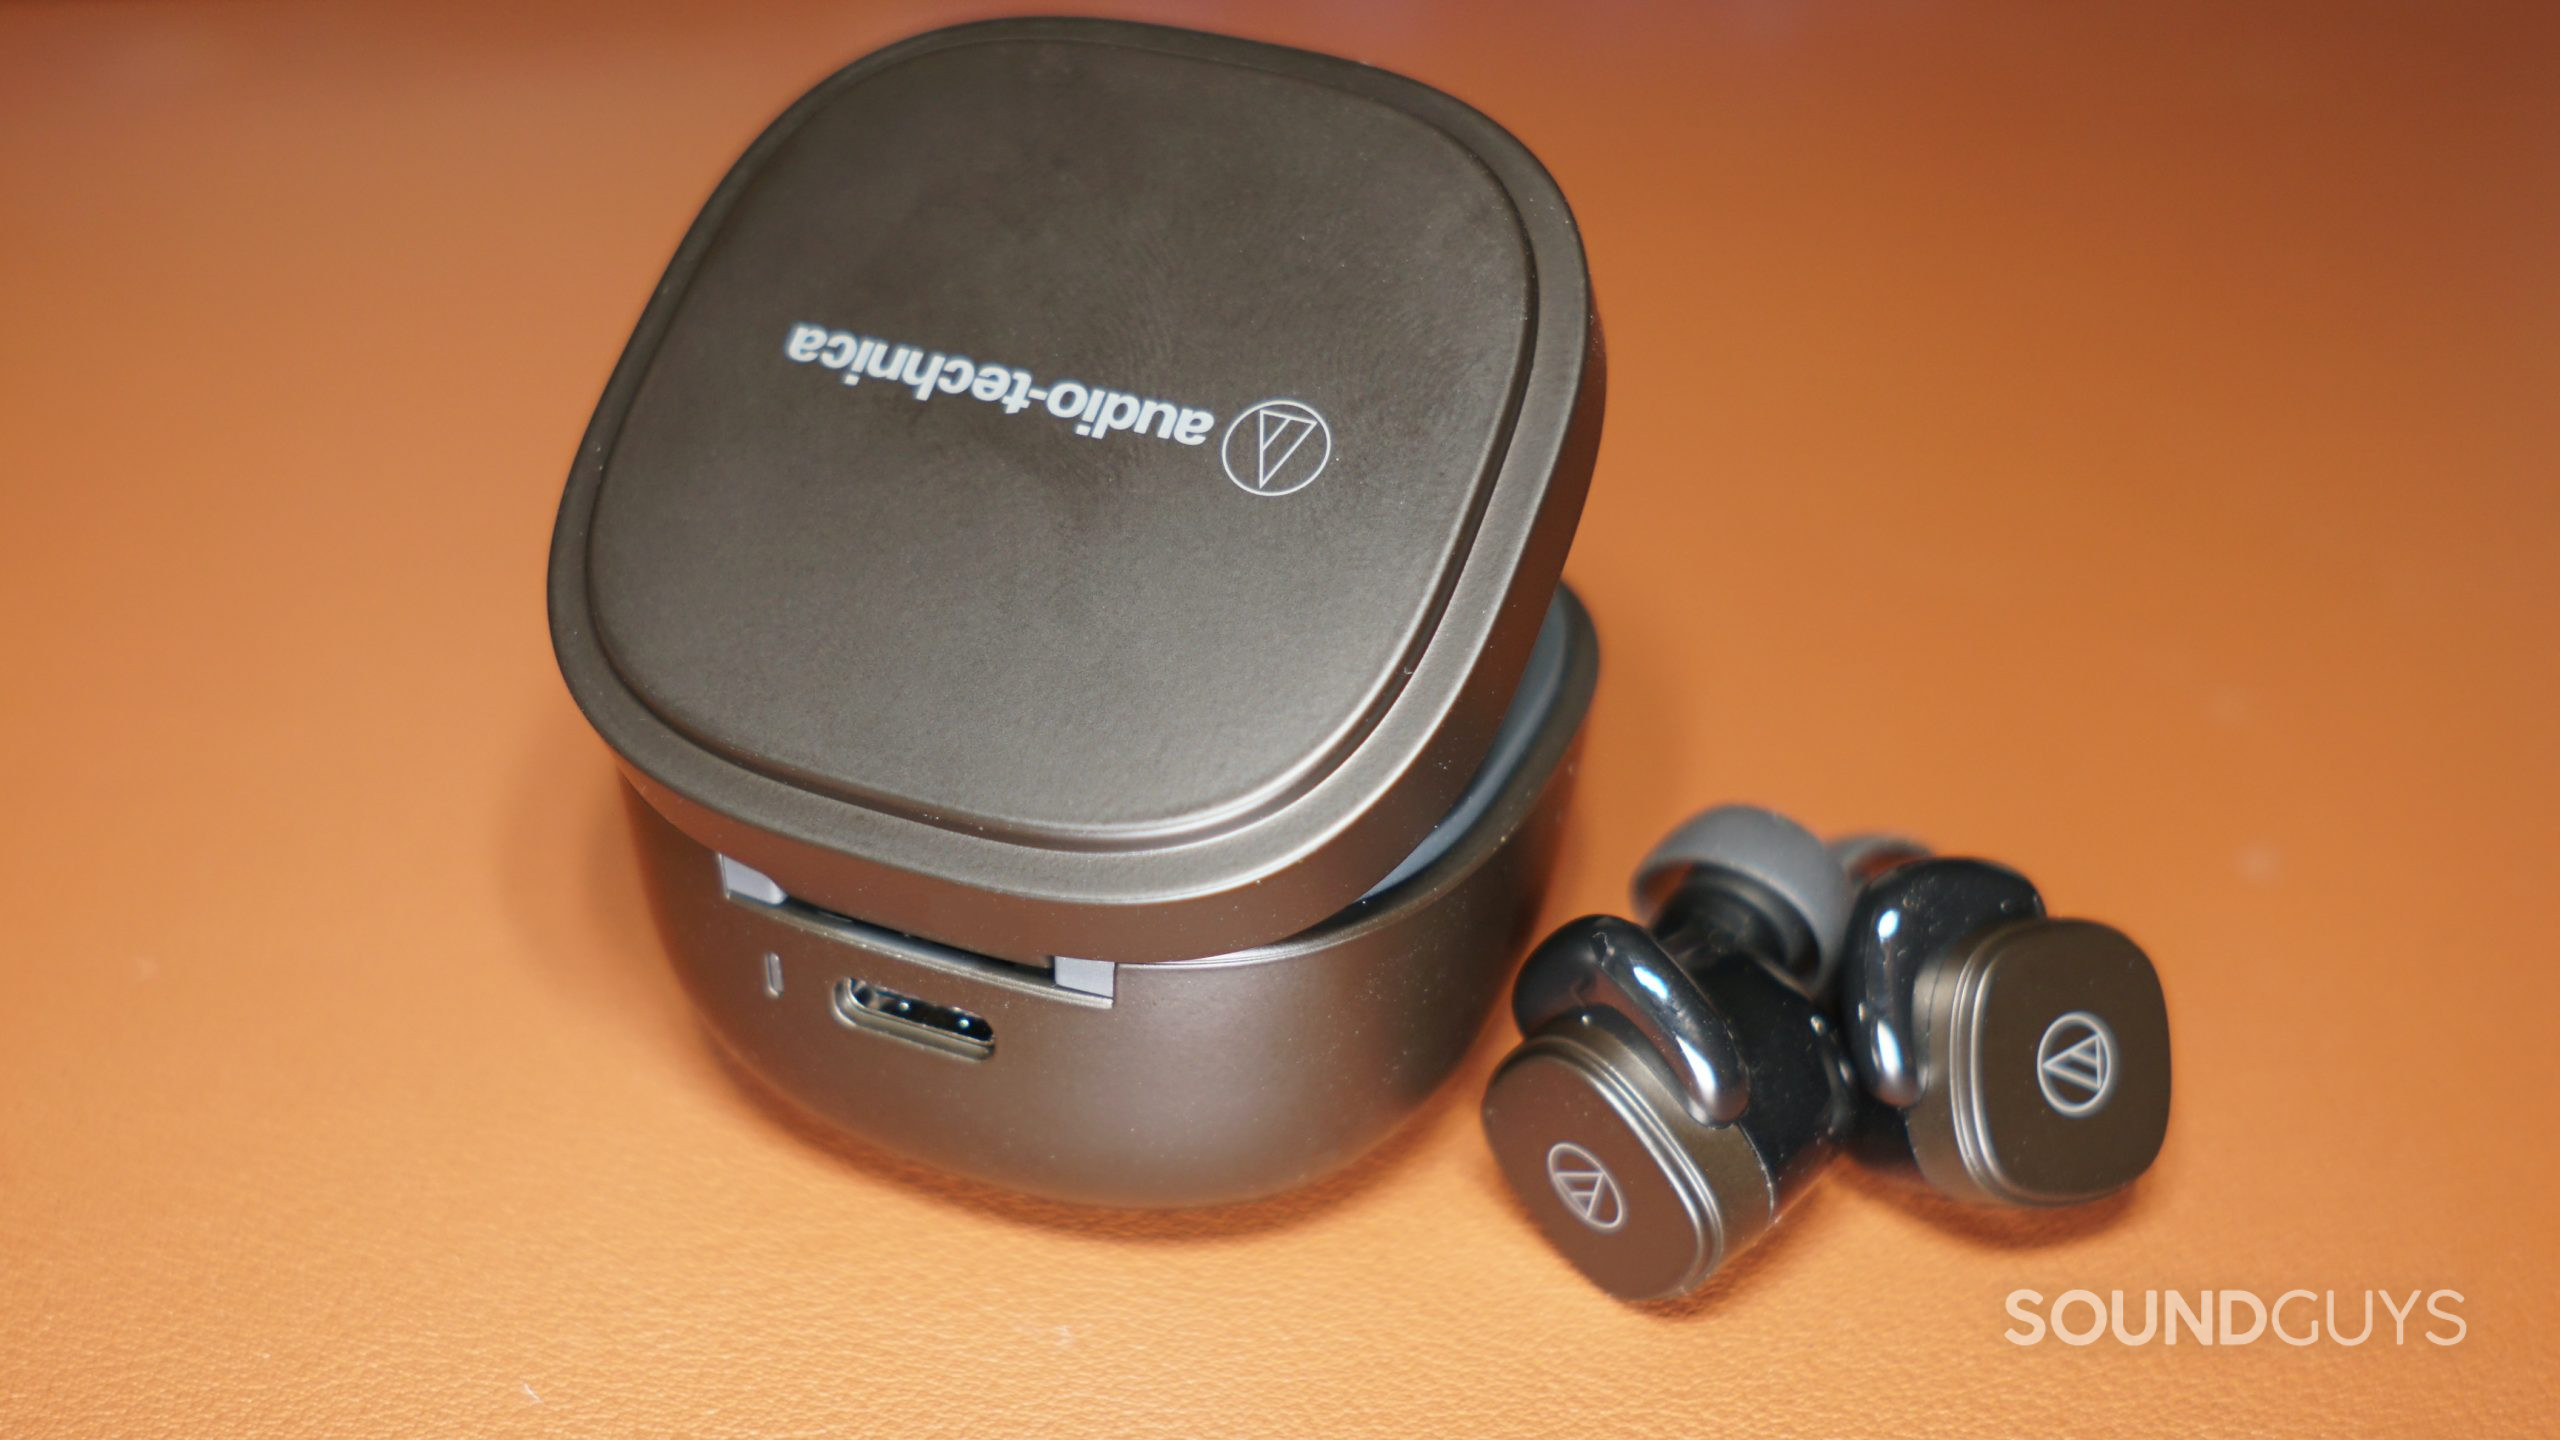 The Audio-Technica ATH-SQ1TW charging case sits next to the earbuds on a leather surface with its USB-C charging port in view.